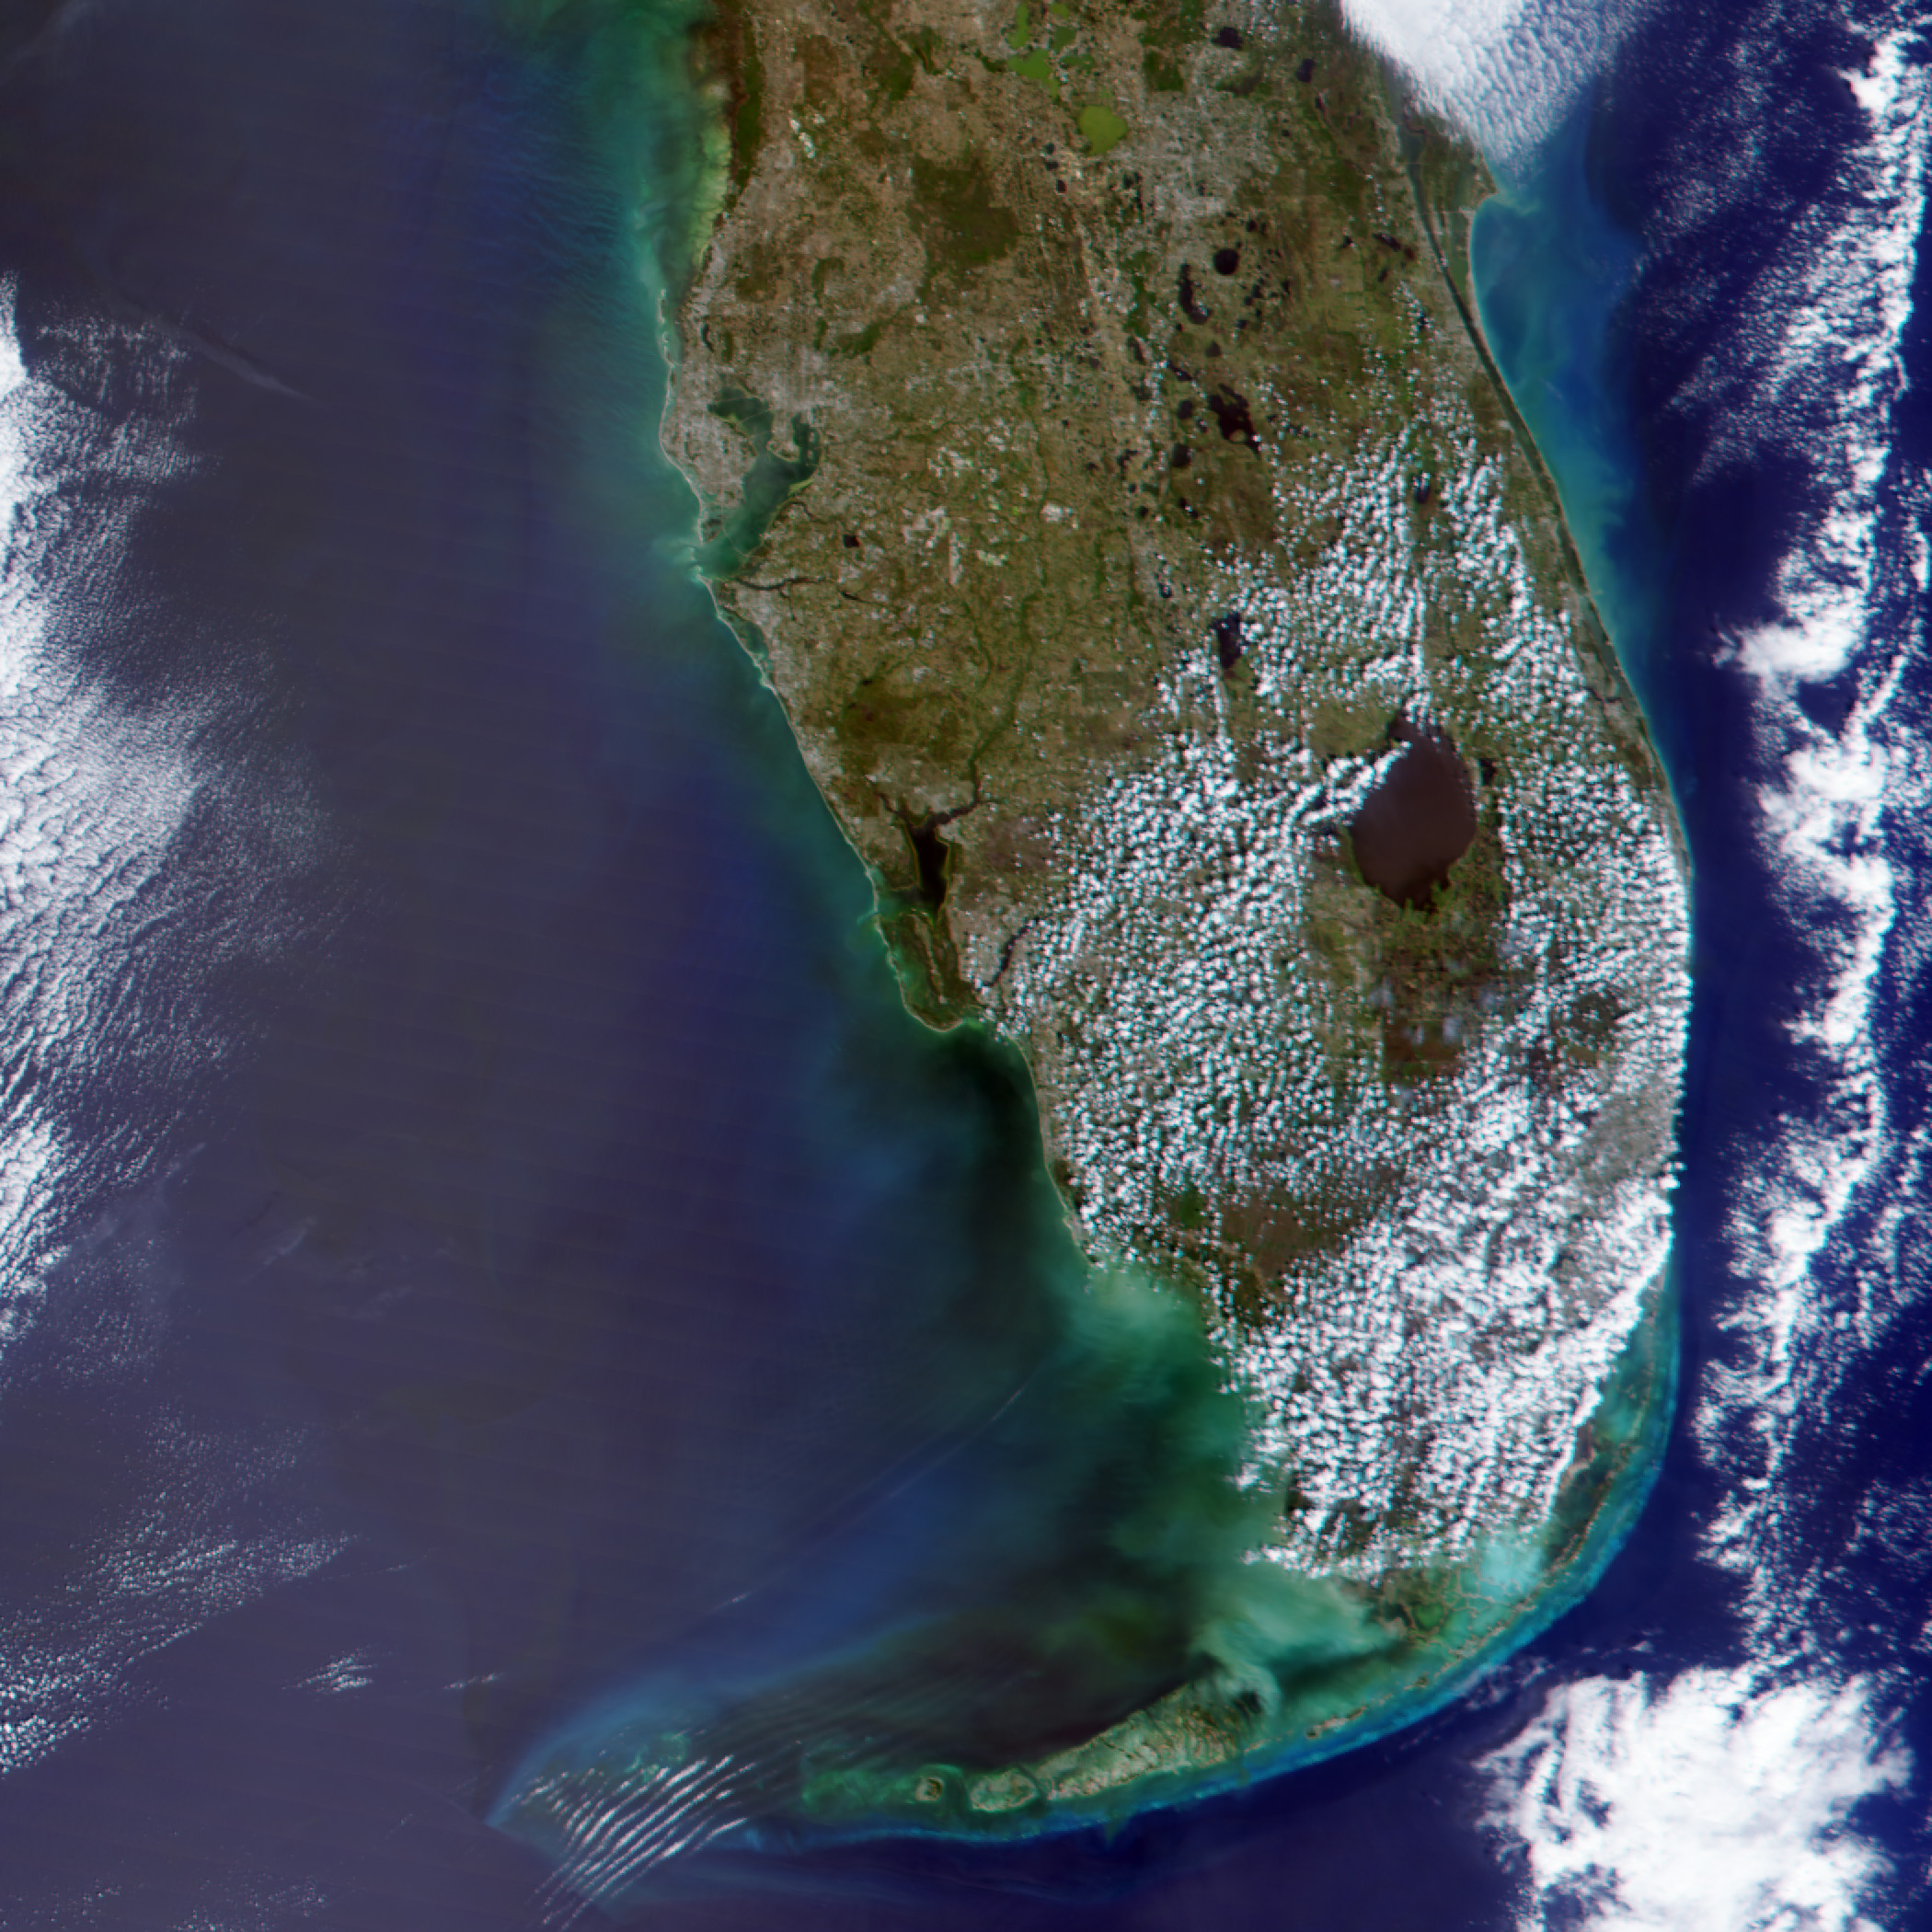 Black Water off the Gulf Coast of Florida - related image preview